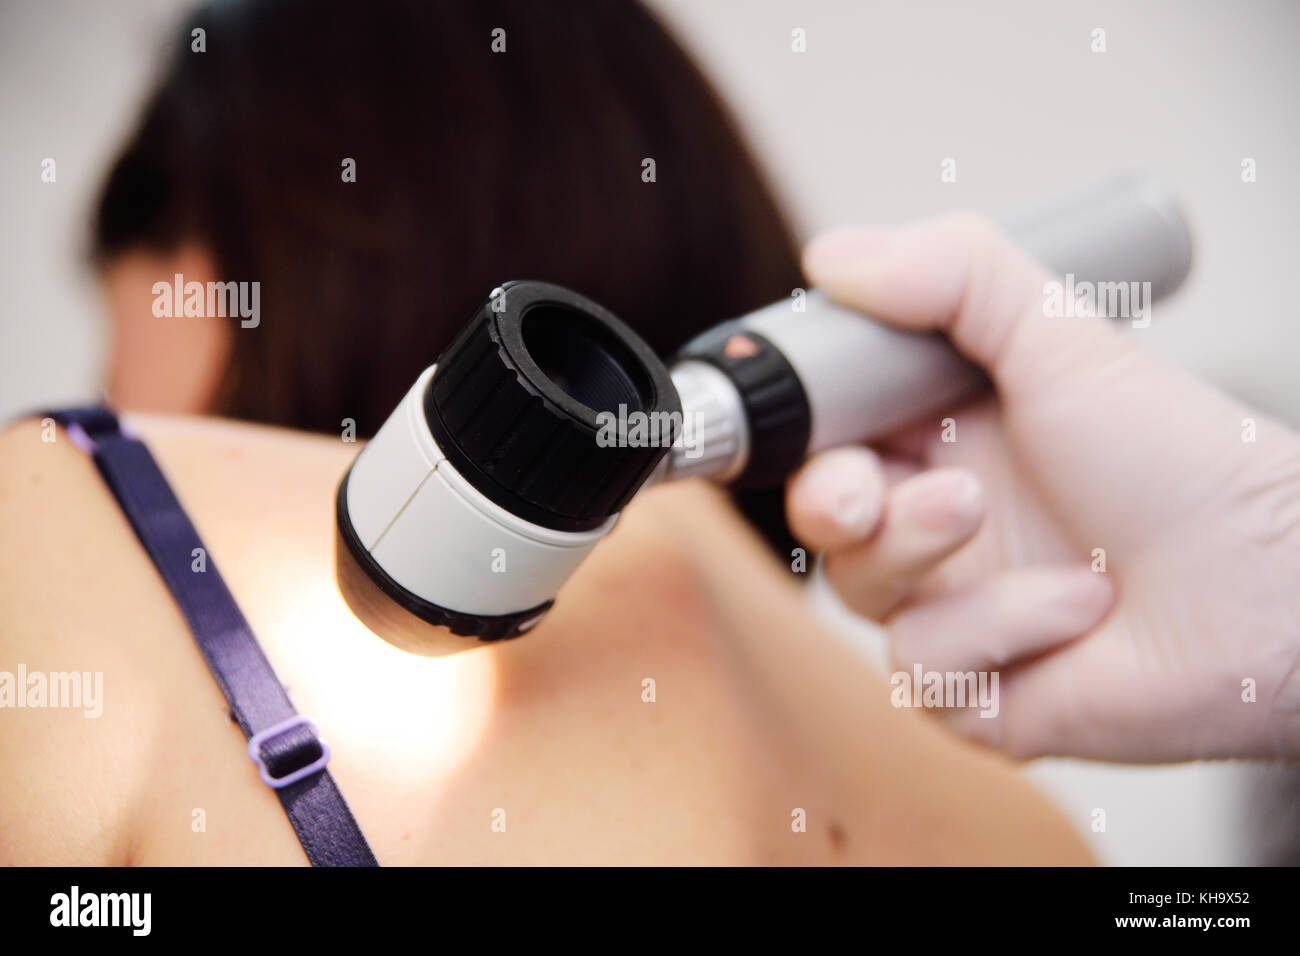 melanoma diagnoinspectionsis. the doctor examines the patient's mole Stock Photo